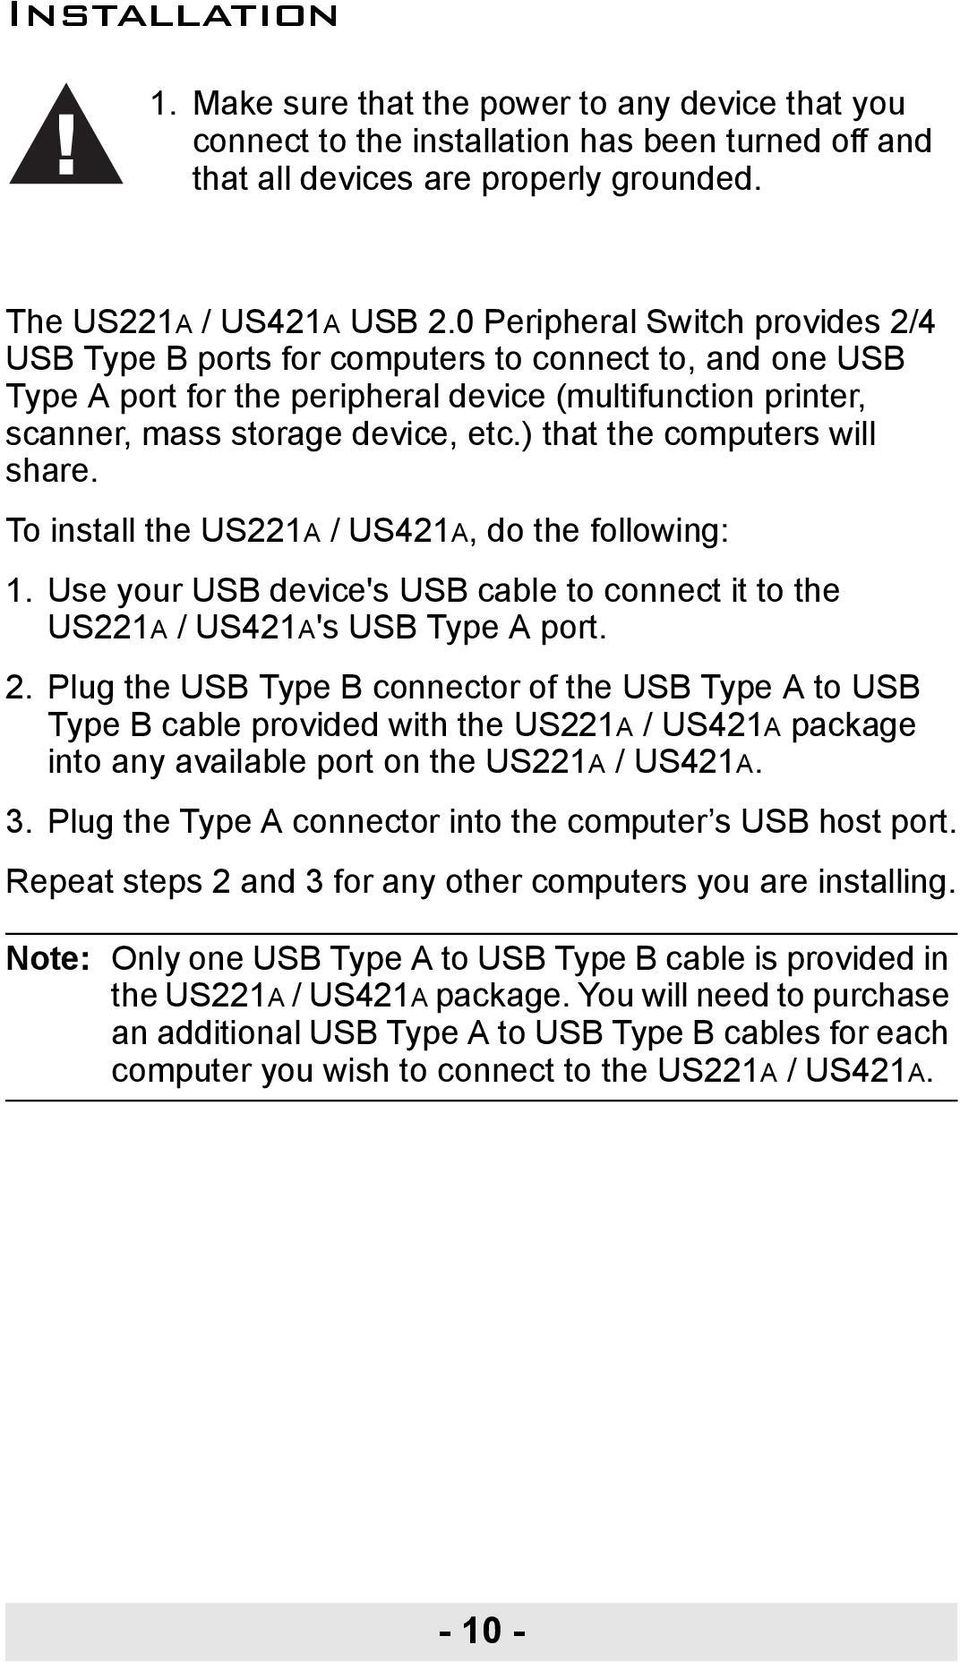 ) that the computers will share. To install the US221A / US421A, do the following: 1. Use your USB device's USB cable to connect it to the US221A / US421A's USB Type A port. 2.